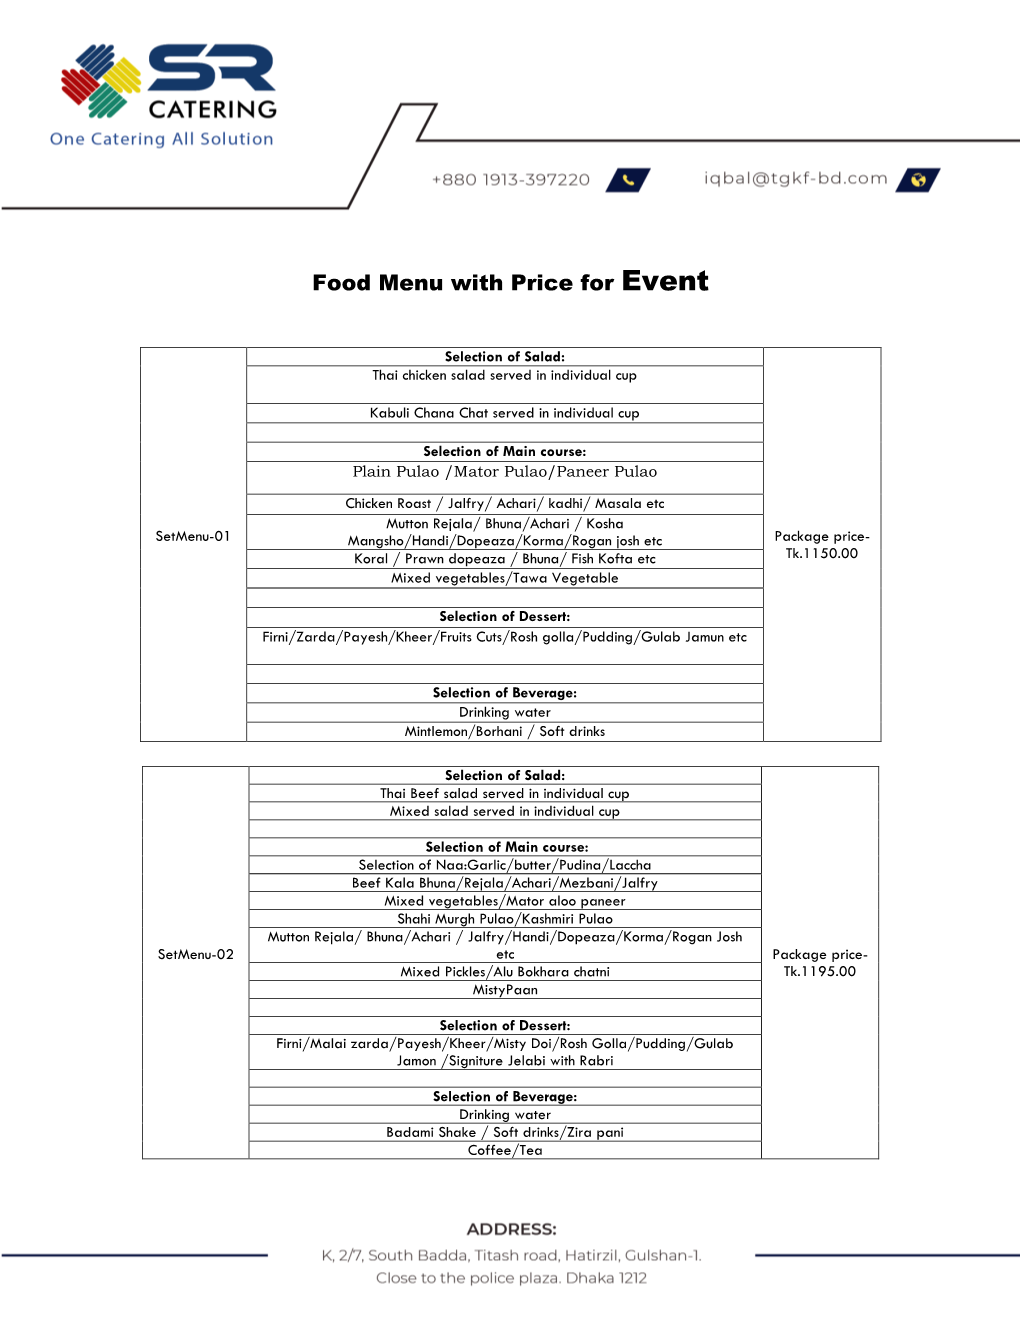 Food Menu with Price for Event